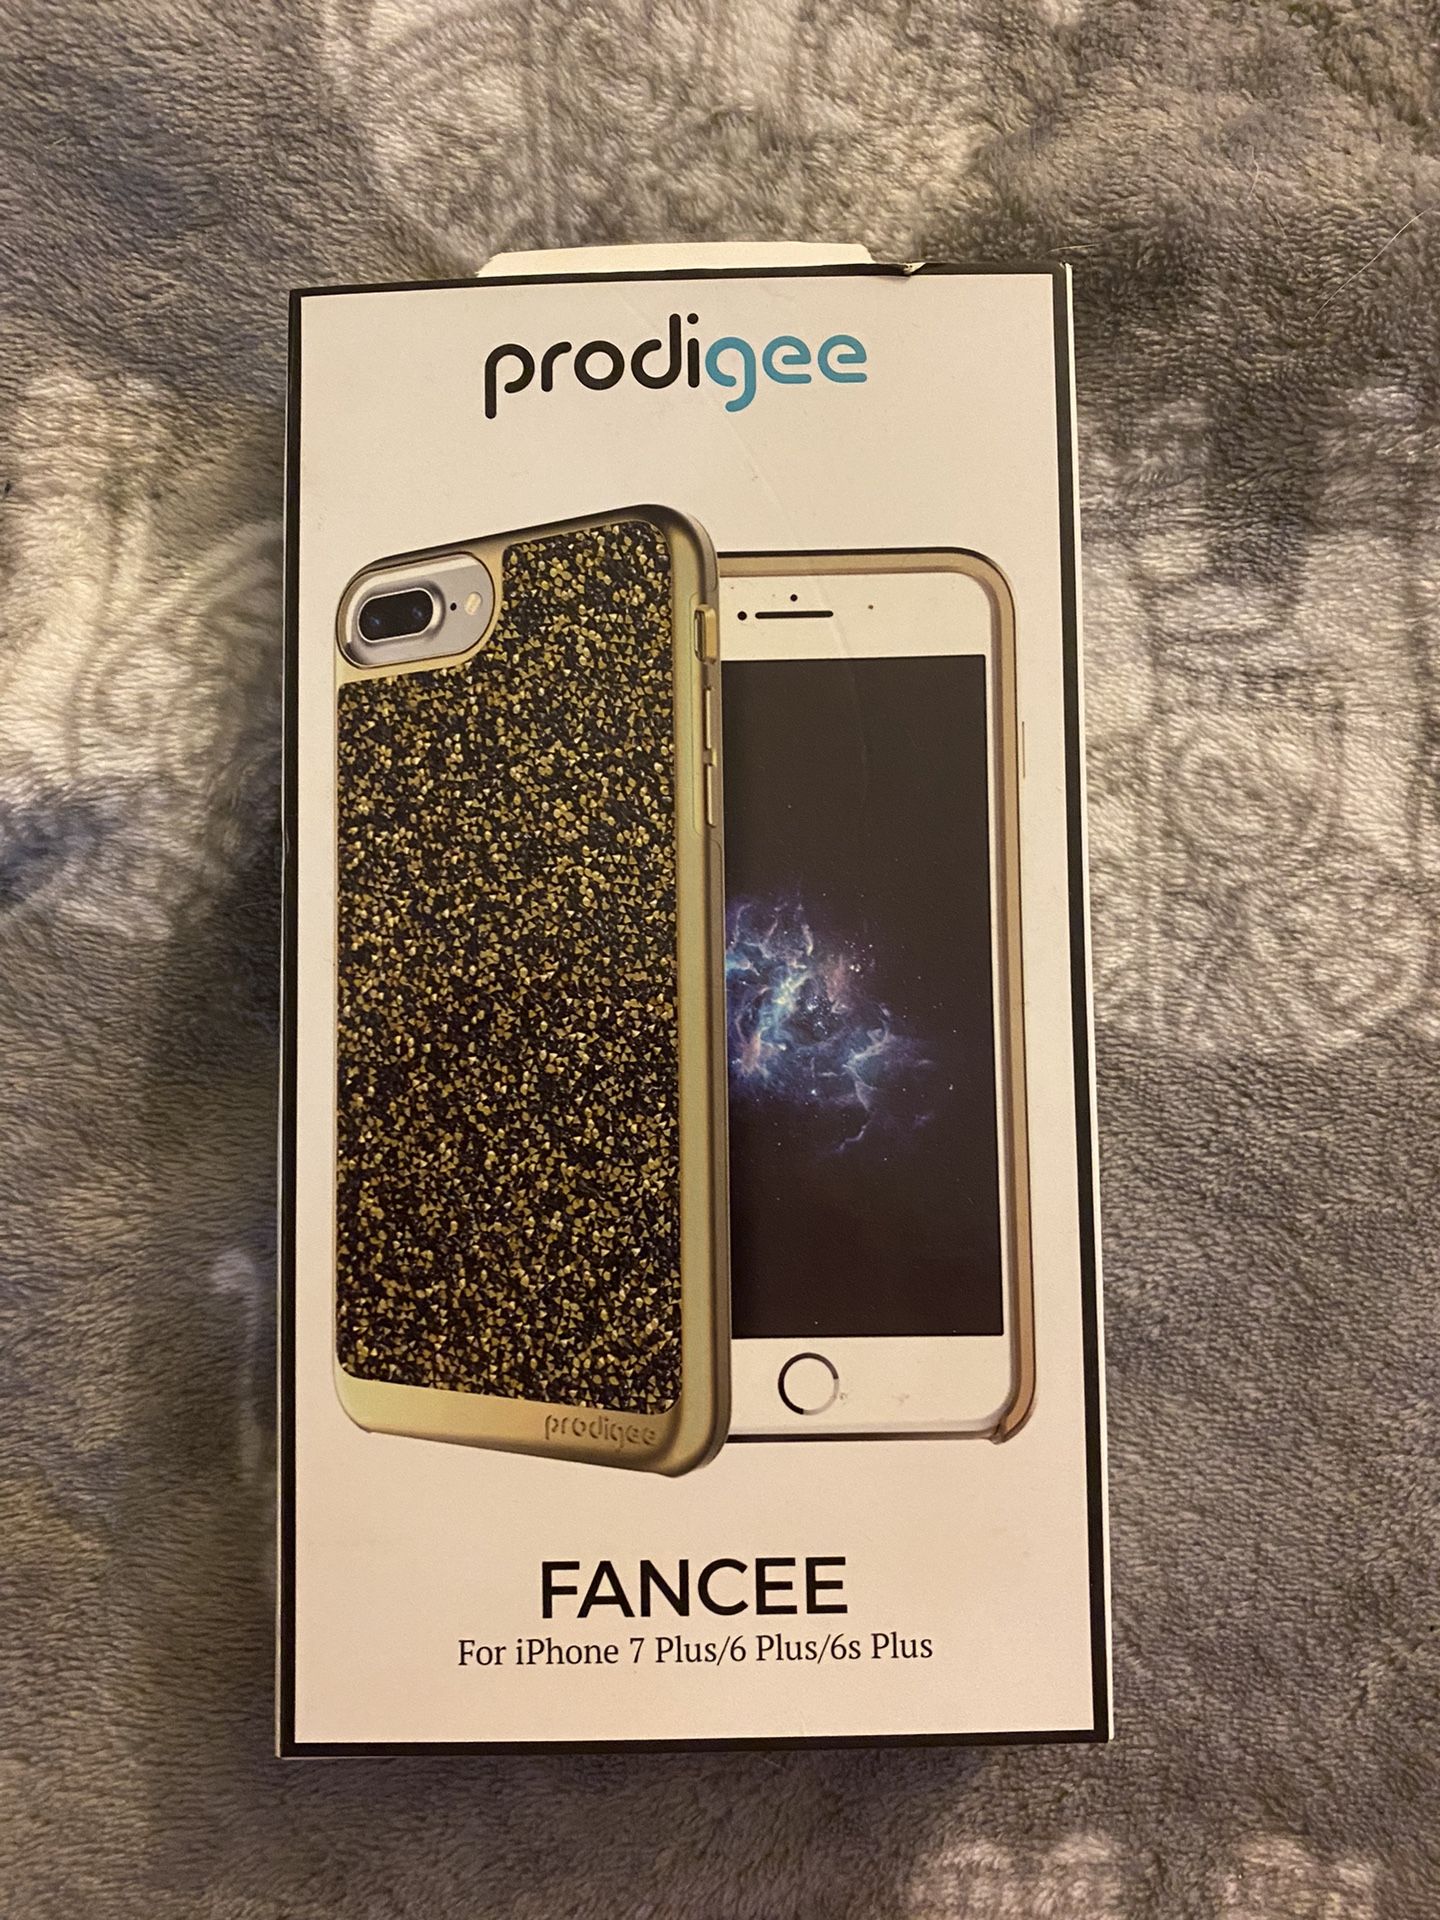 Prodigee FANCEE iPhone 7 Plus/6 Plus/6s Plus Case (compatible w/ Screen Protector)